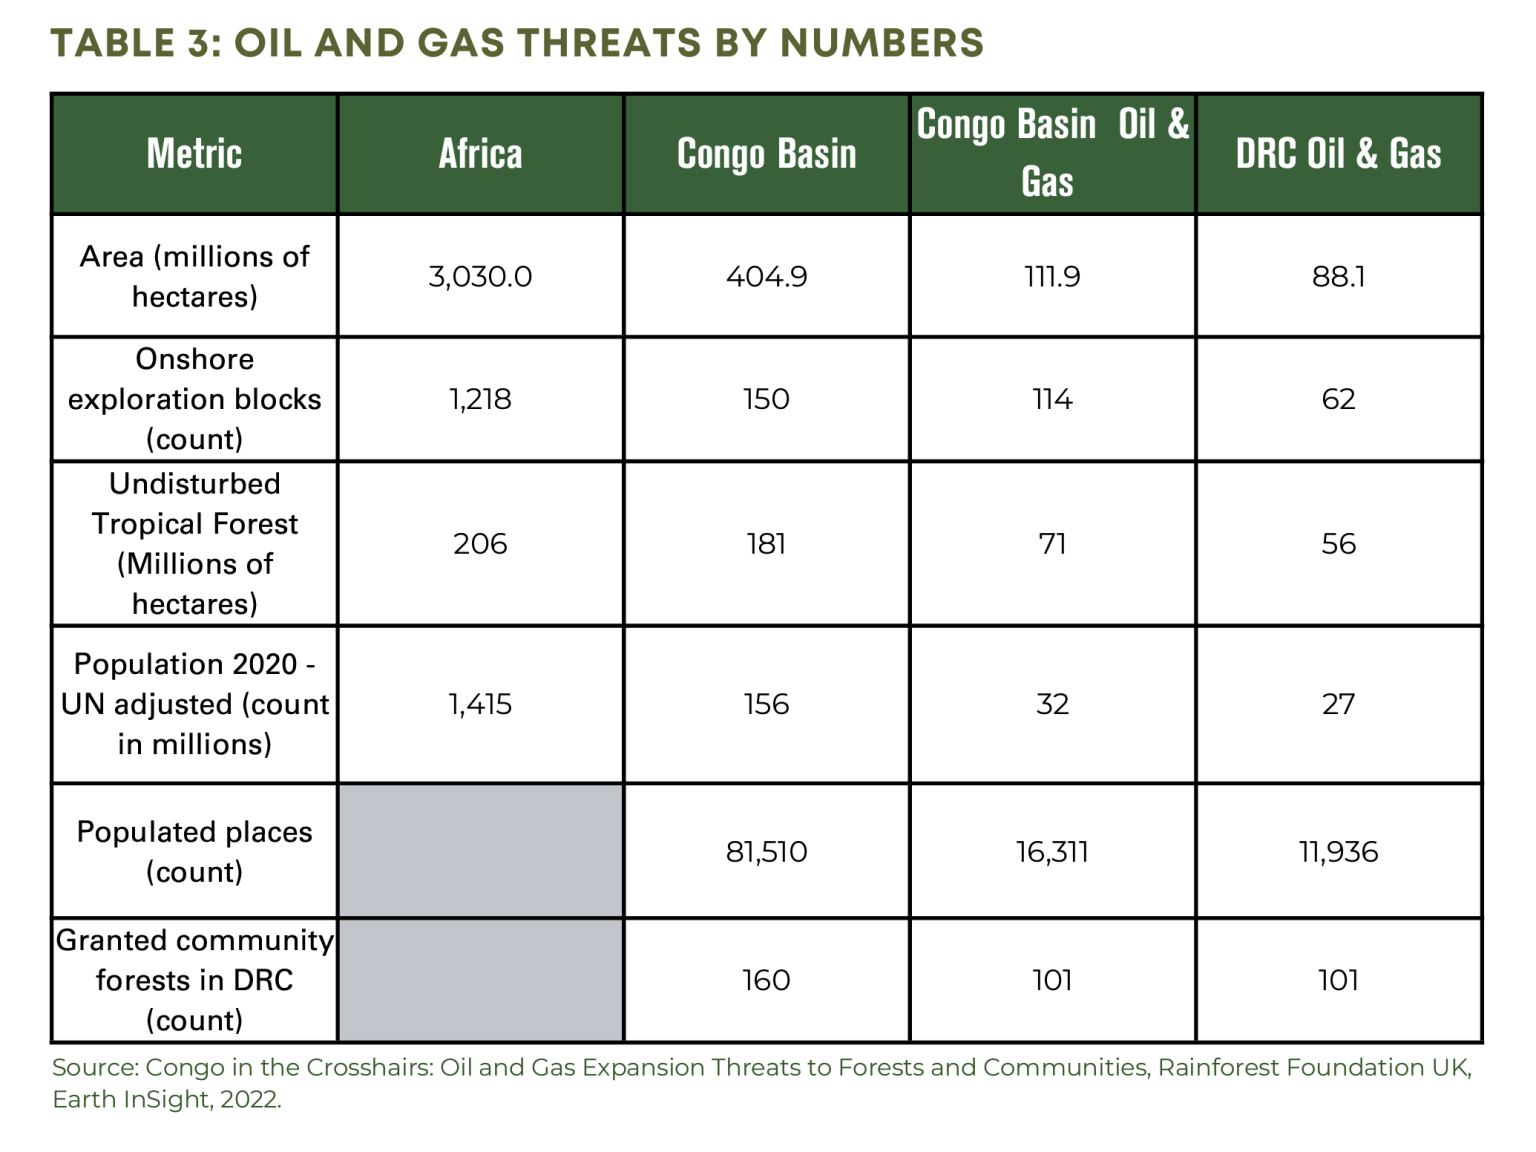 Table 3 - Oil and Gas Threats